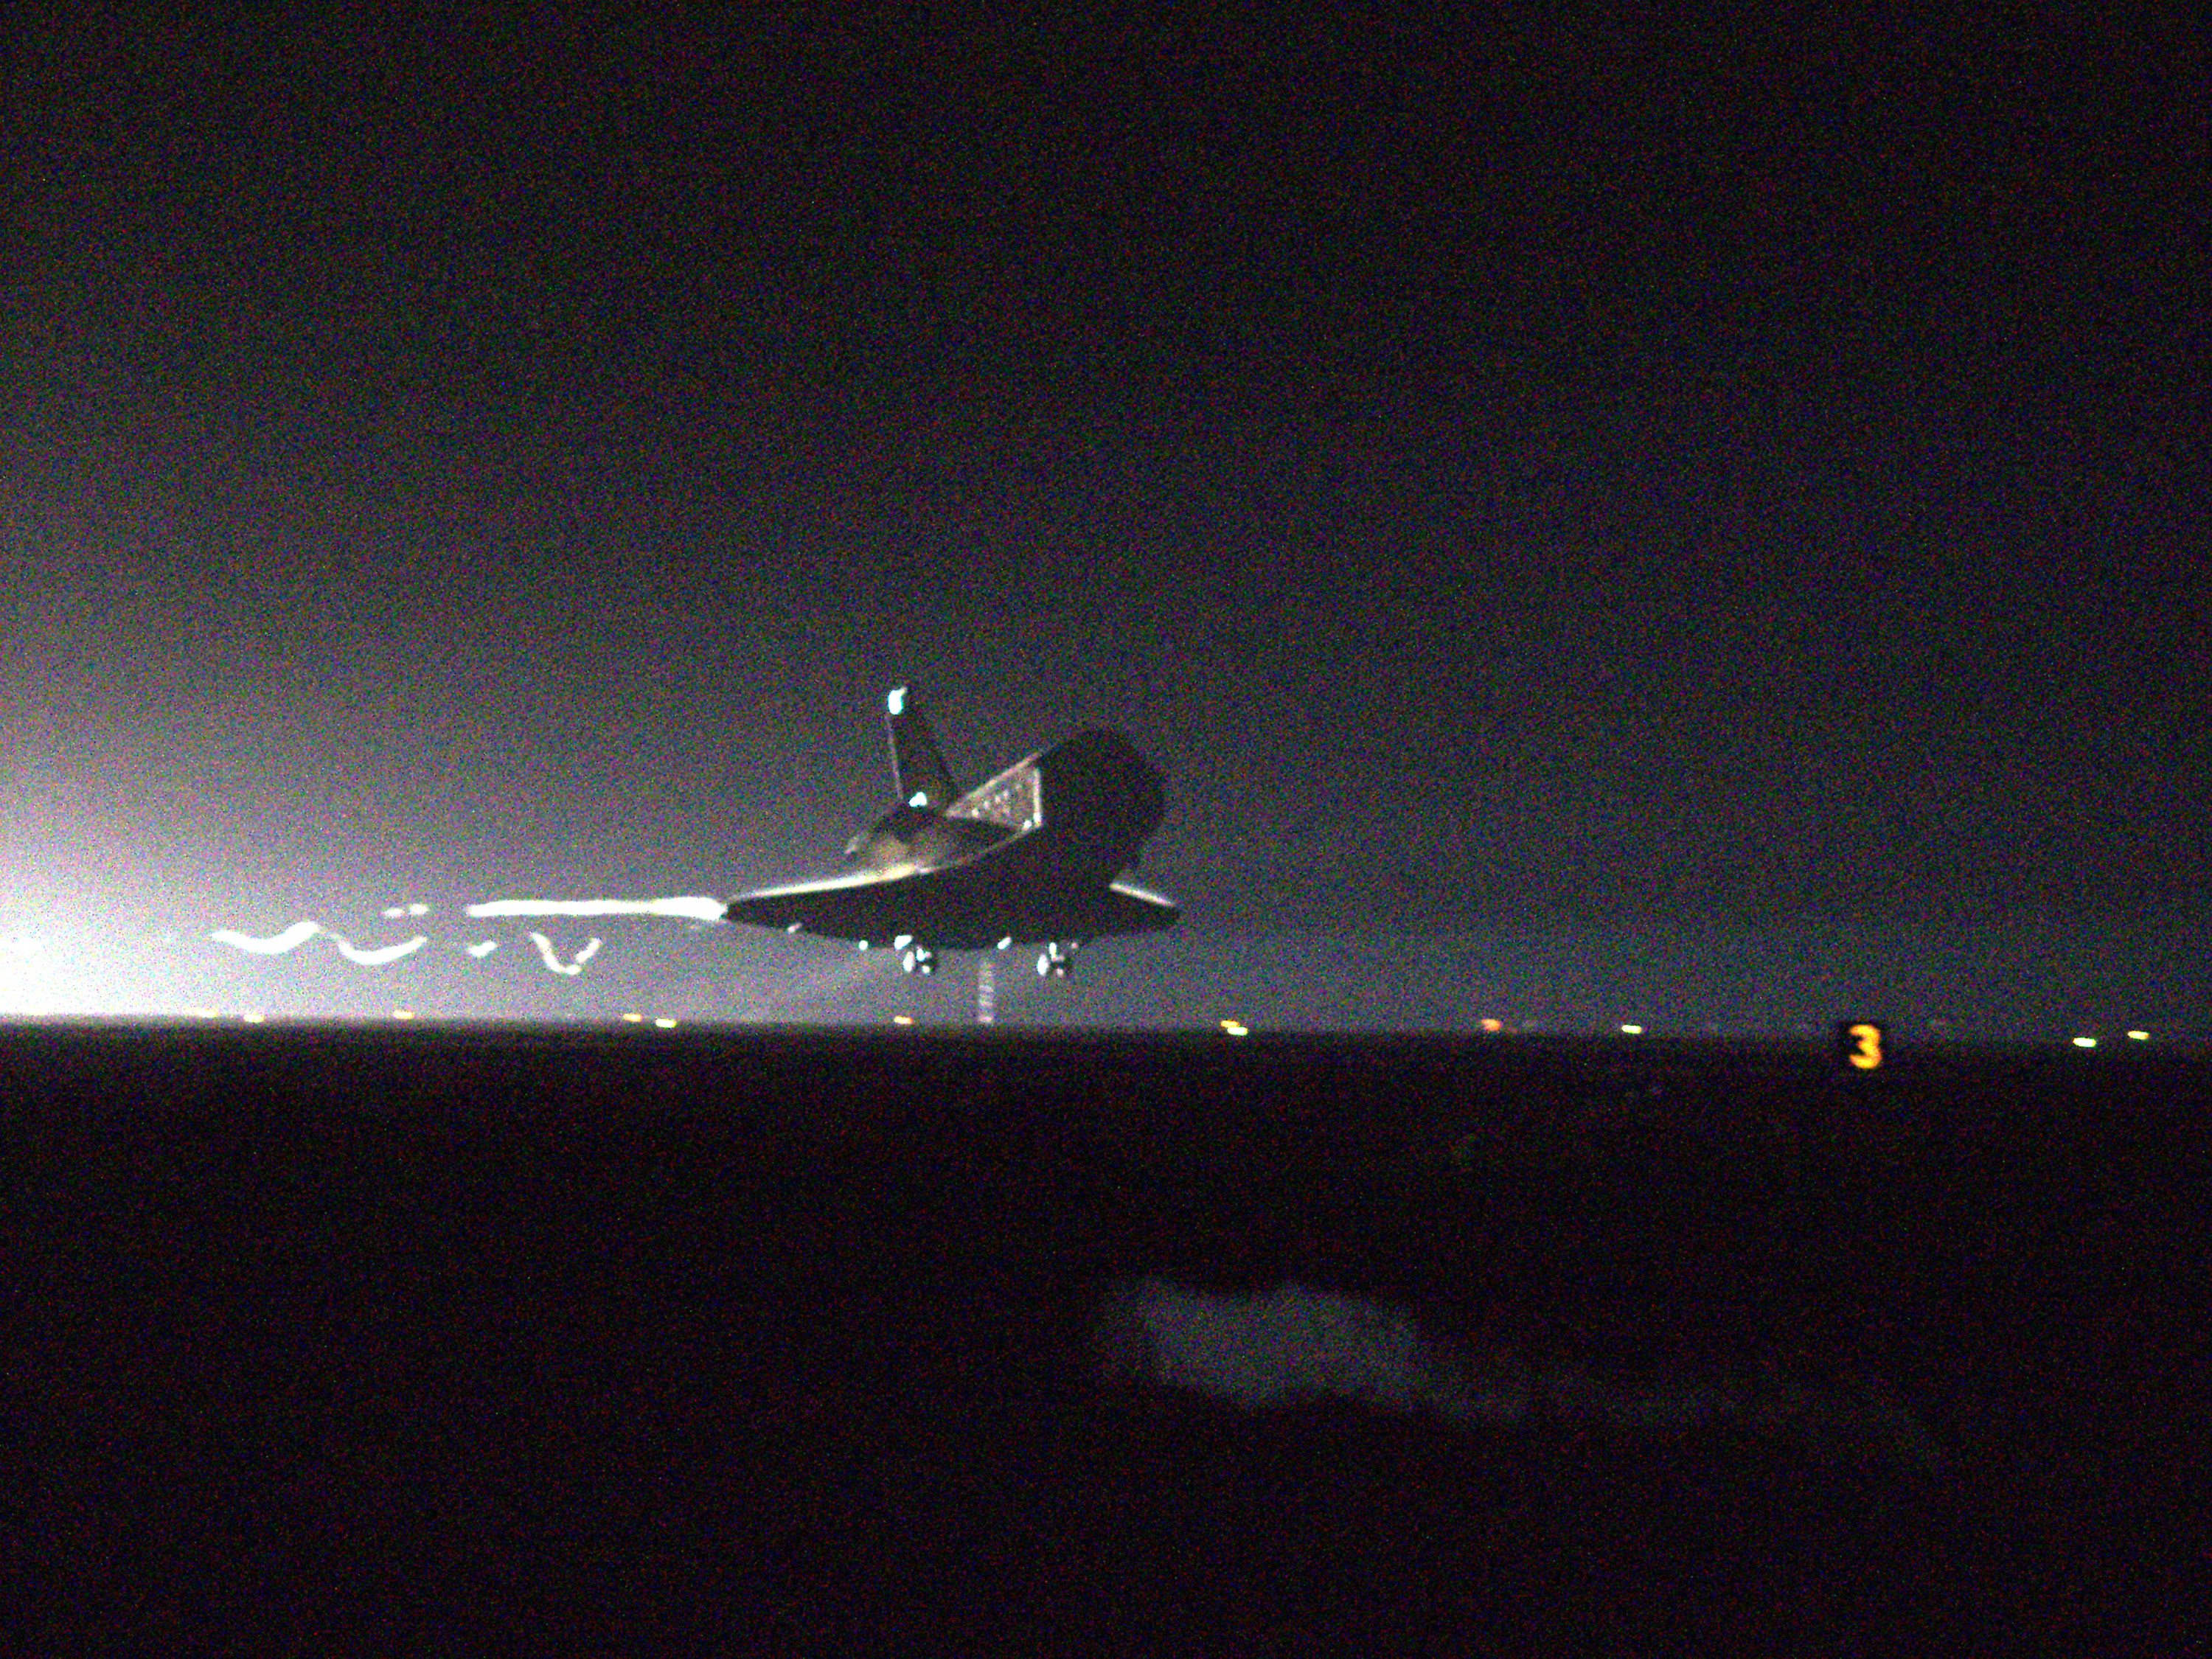 The space shuttle columbia is dimly seen from the front coming in for a landing in the early morning darkness.